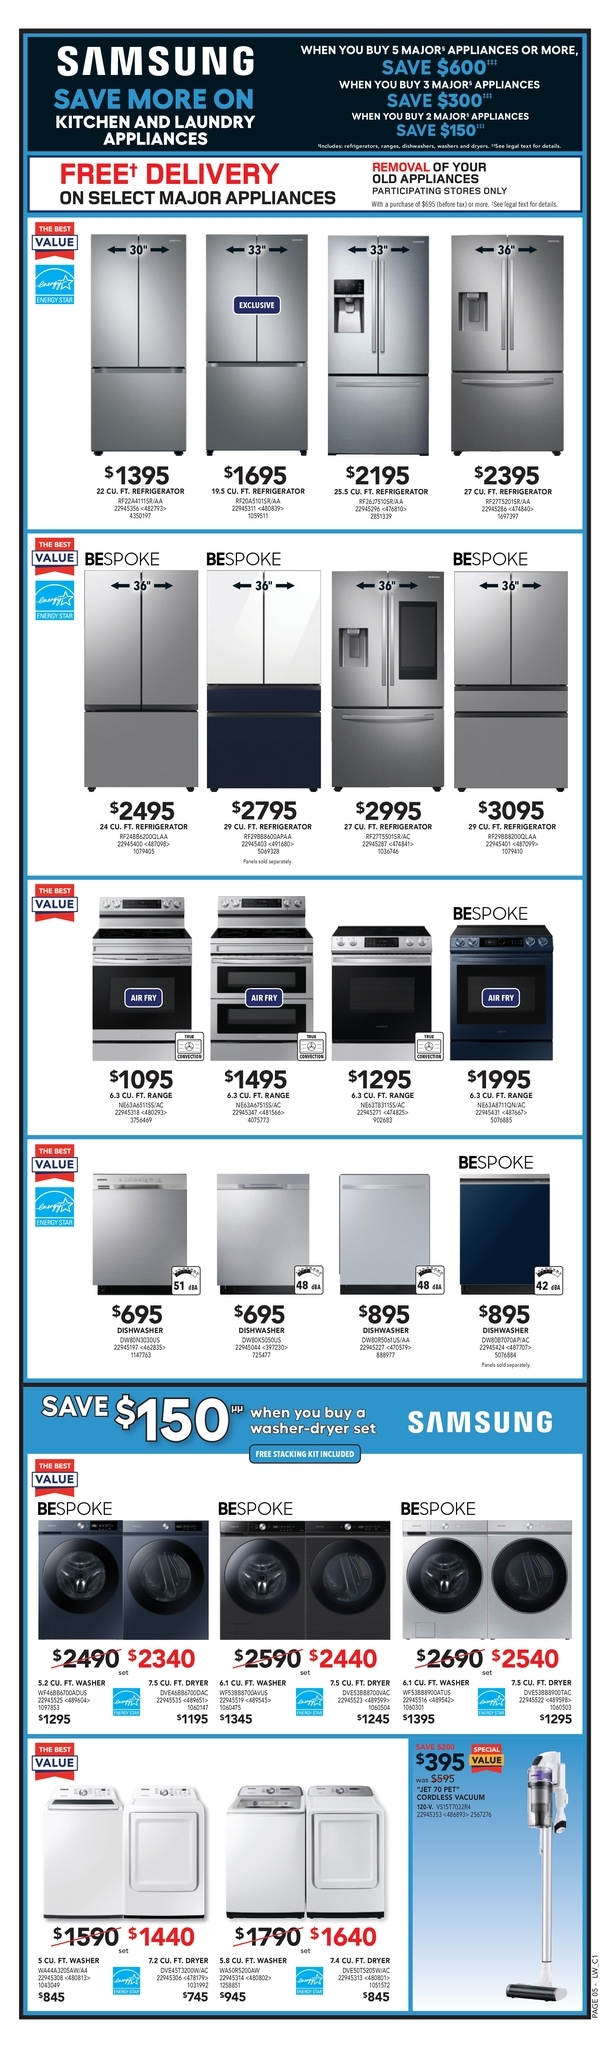 LOWE'S - Weekly Flyer Specials - Black Friday - Page 7